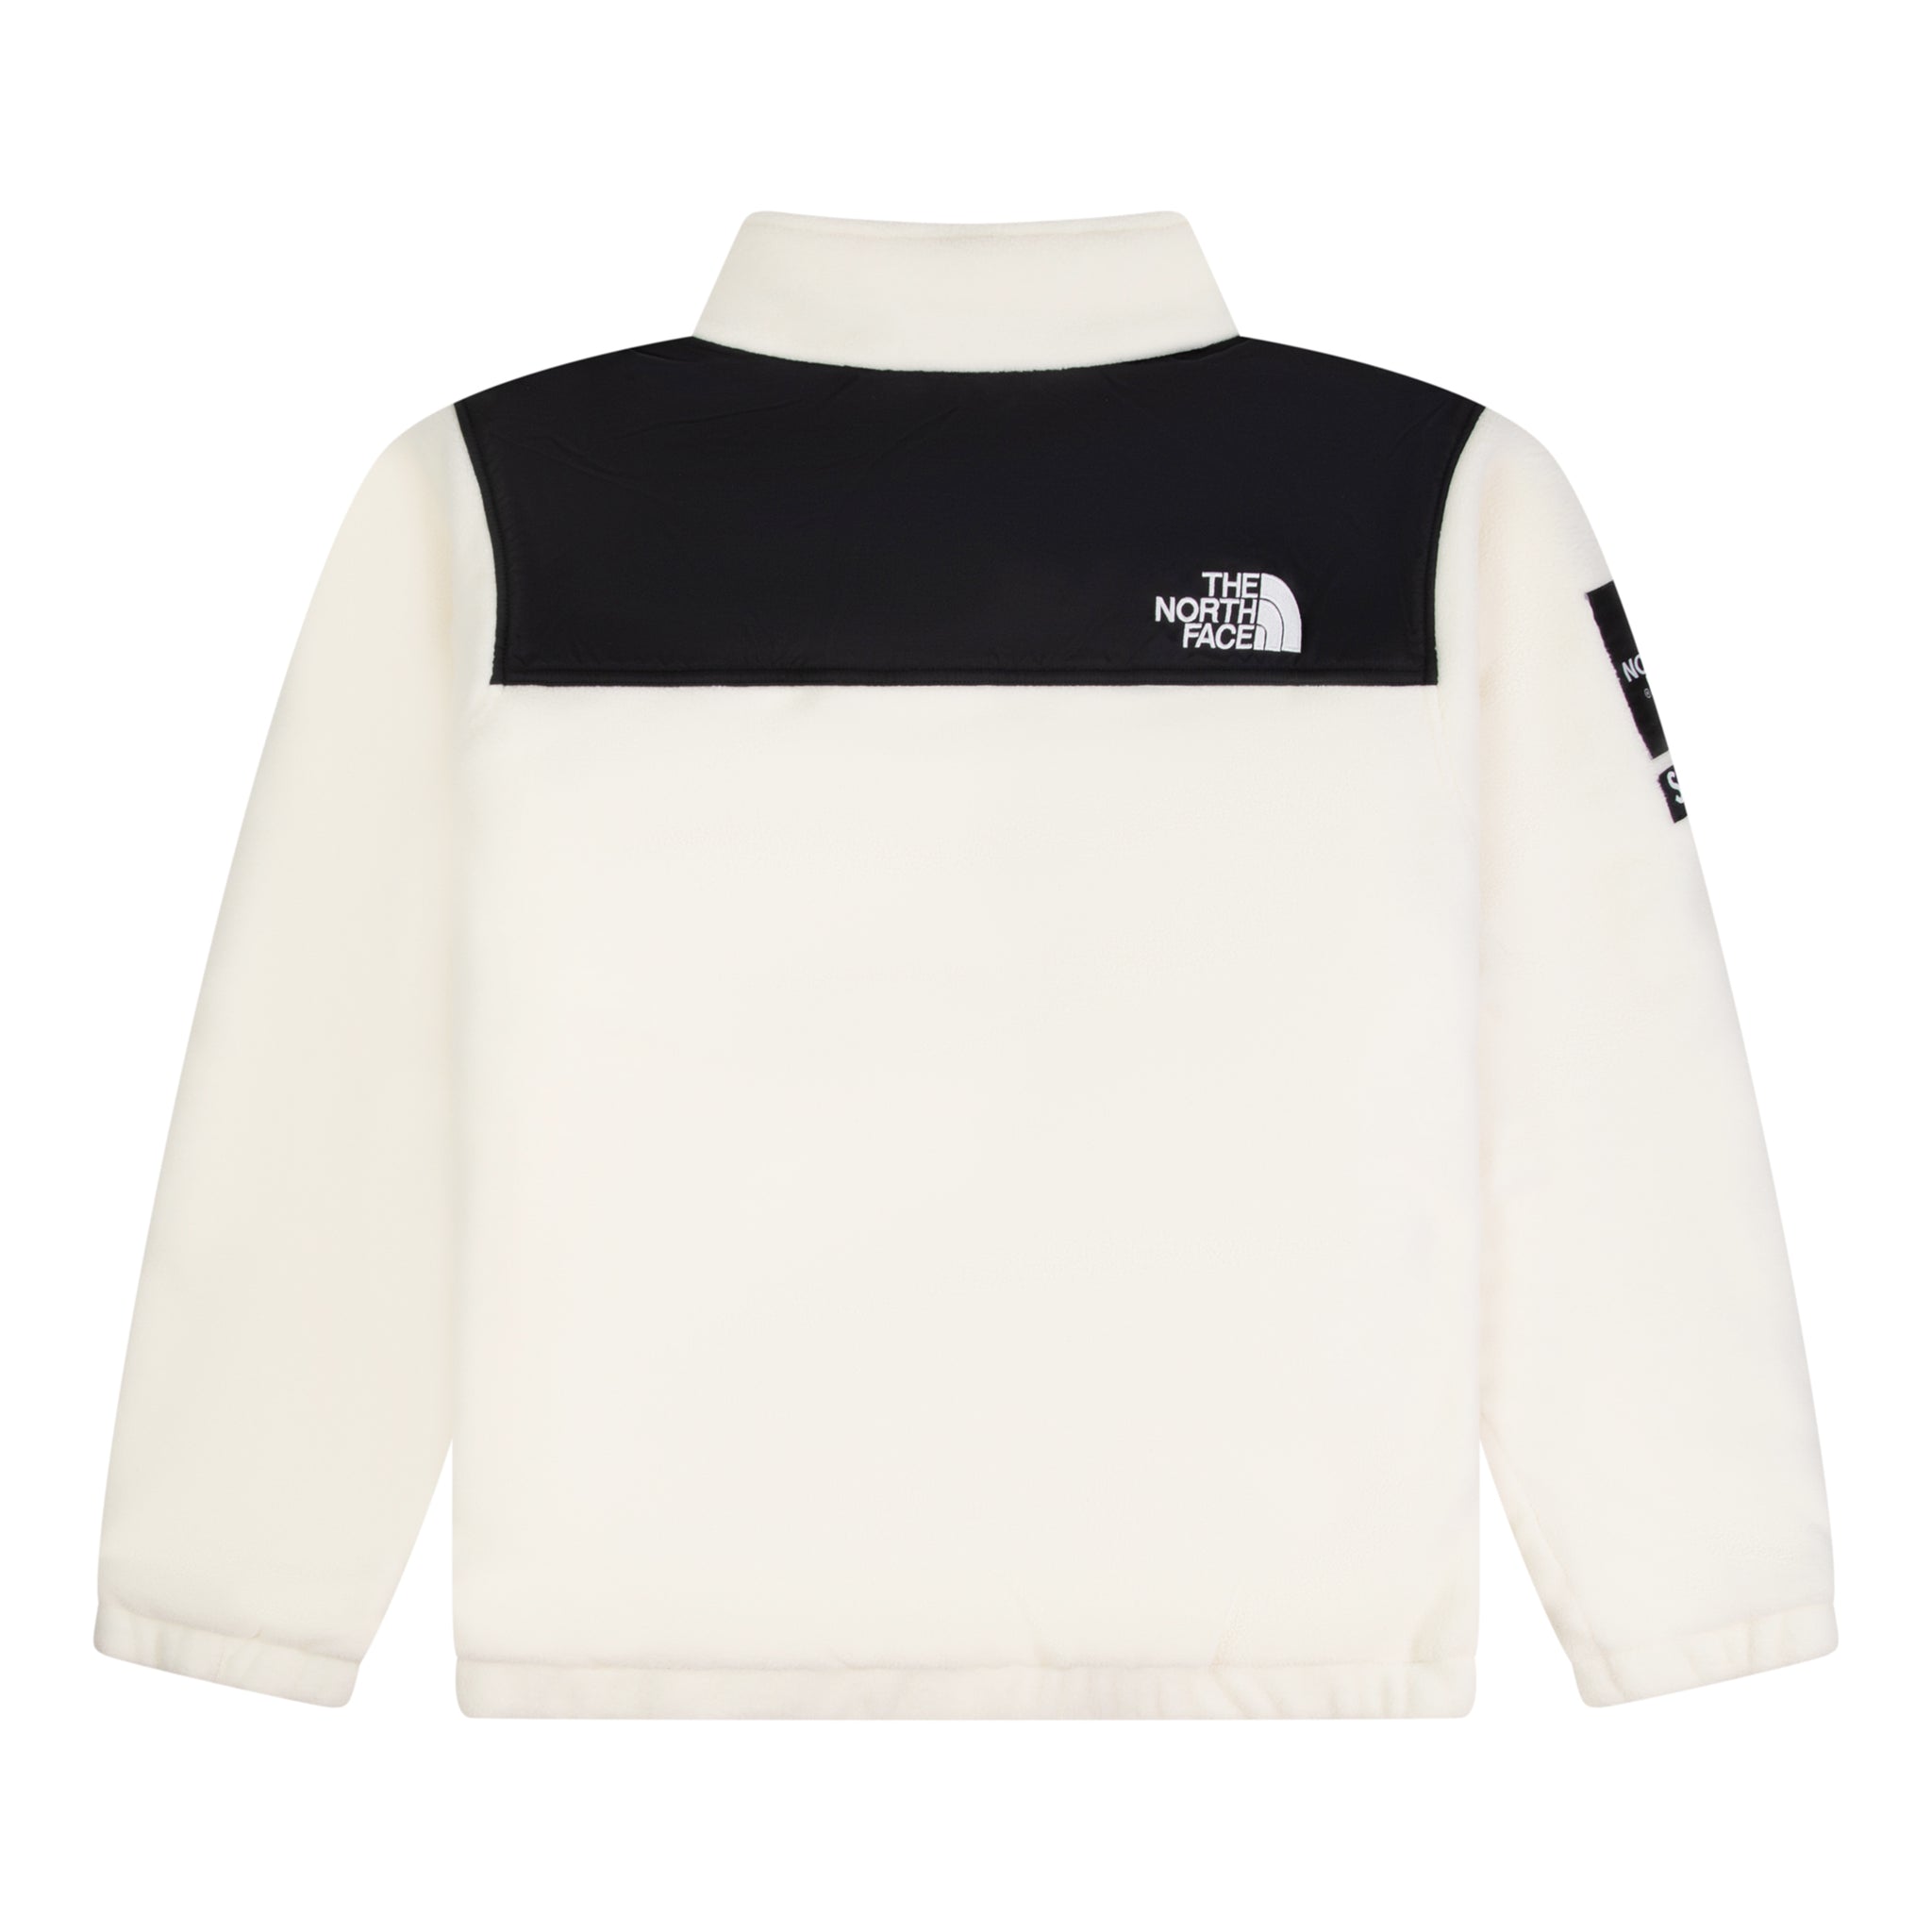 SUPREME THE NORTH FACE EXPEDITION FLEECE JACKET WHITE